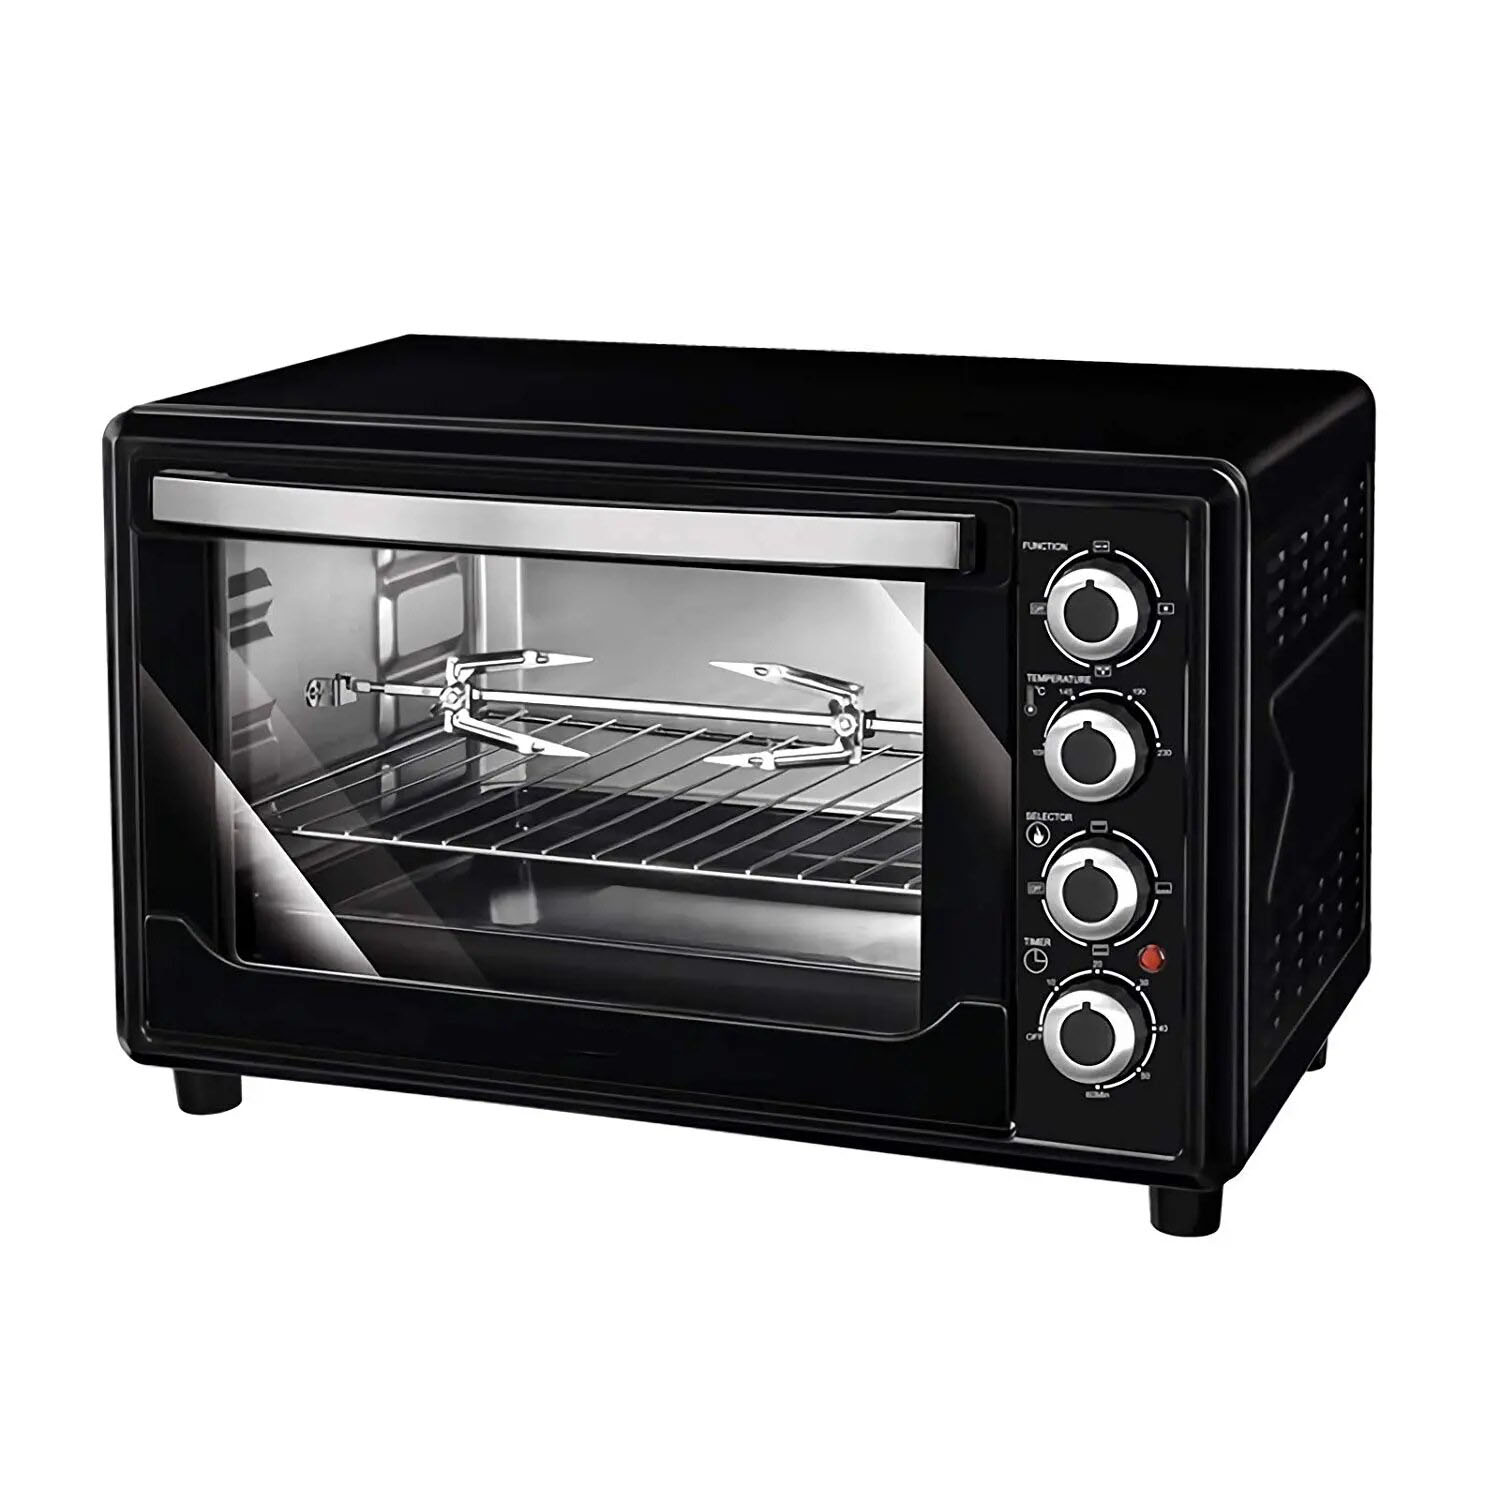 Convection Oven Stainless Steel Chicken Steamer Temperature Black